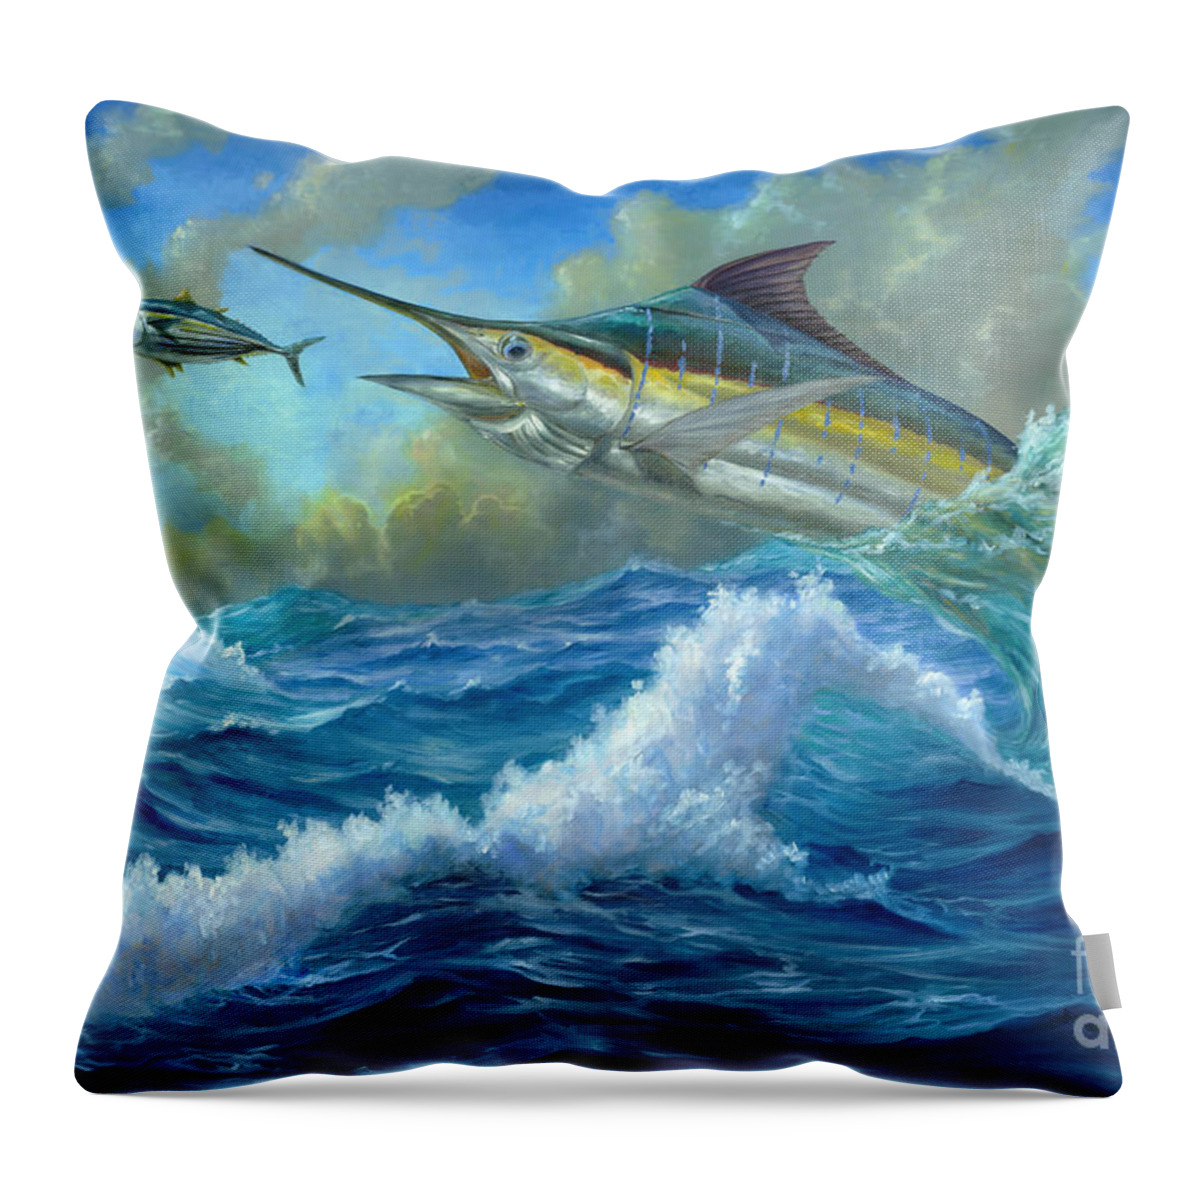 Blue Marlin Throw Pillow featuring the painting Evening Meal by Terry Fox